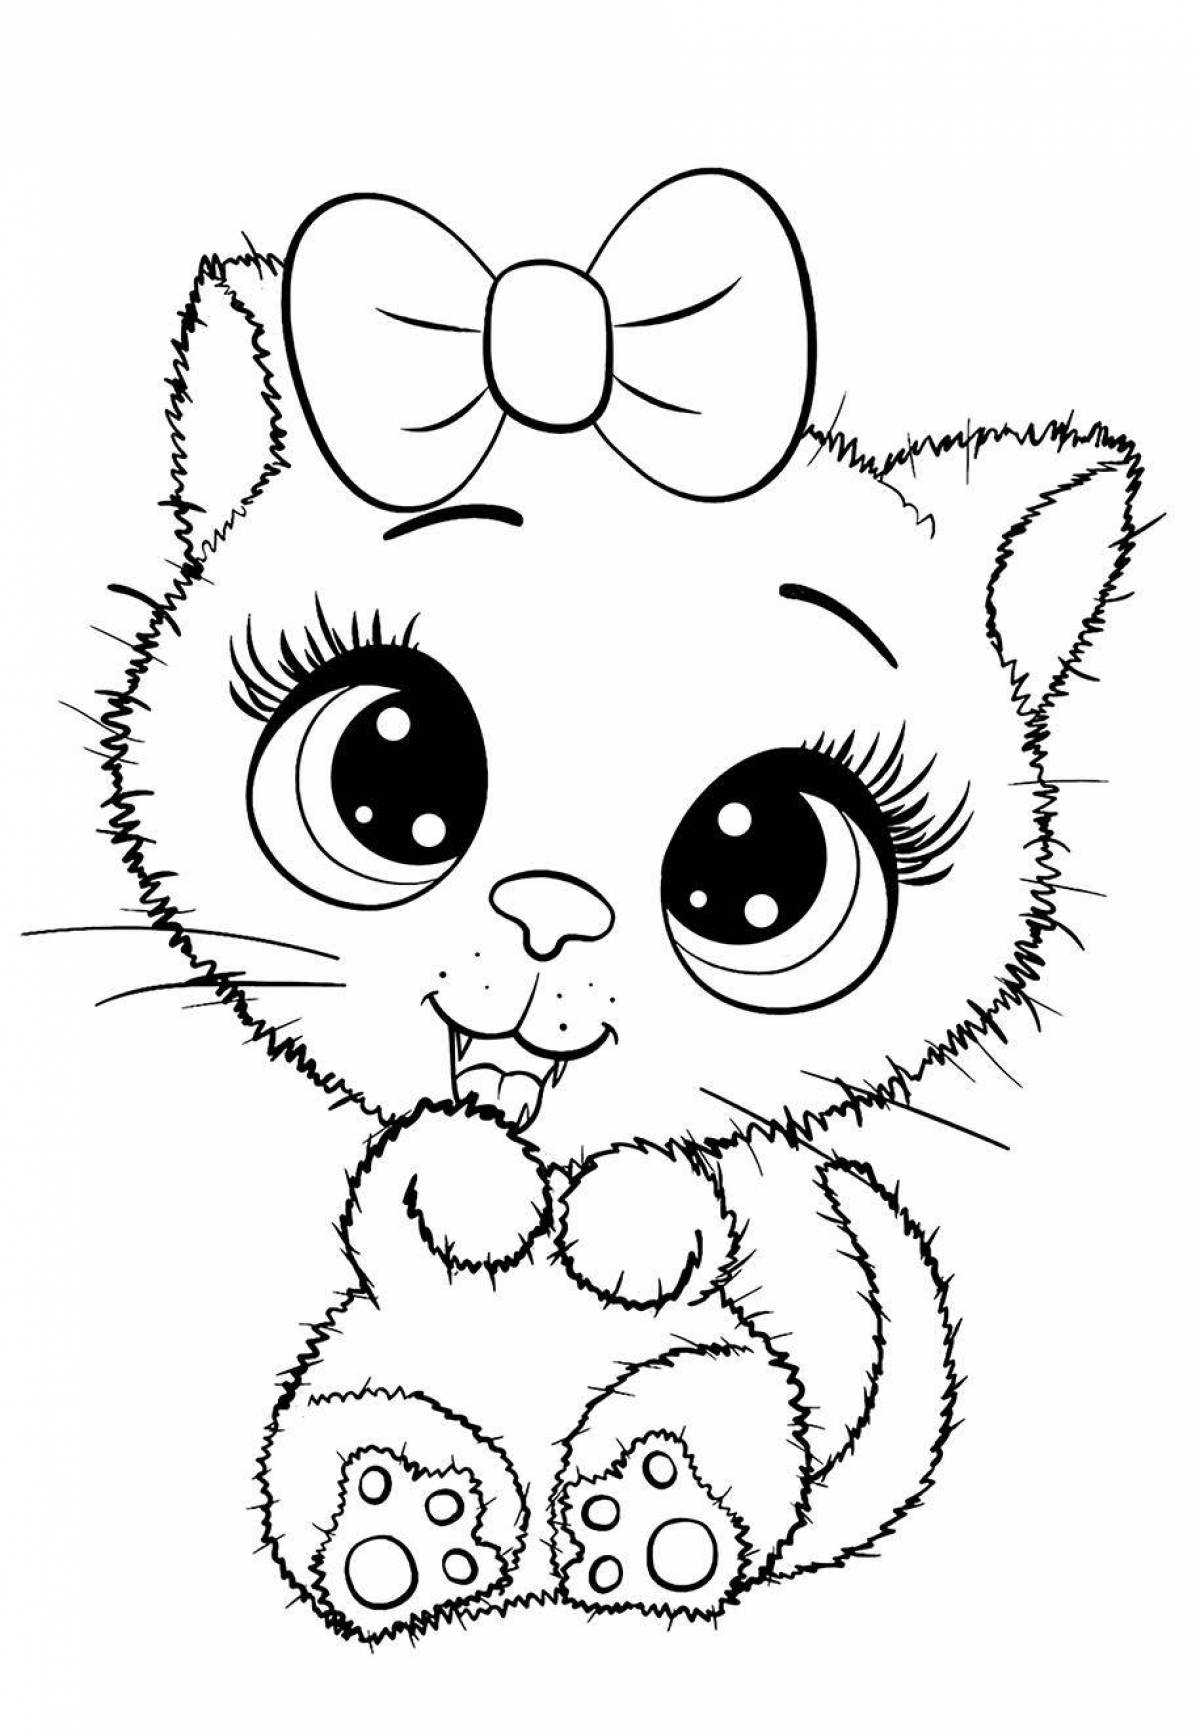 Naughty animals coloring page